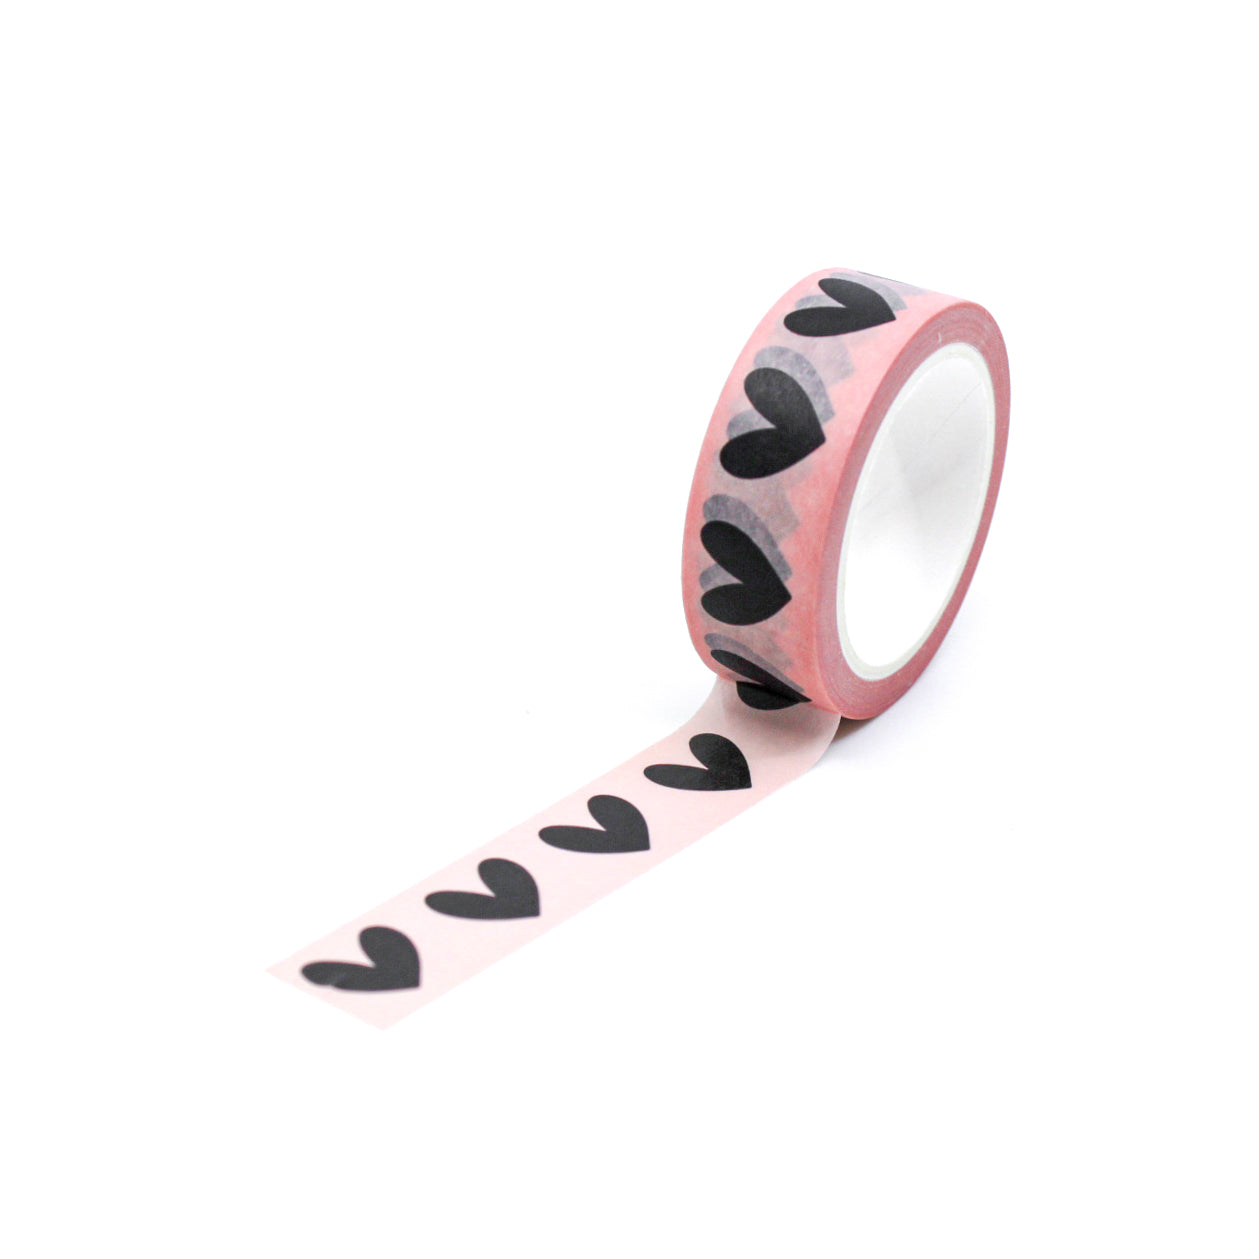 Adorn your planner or journal with our charming black hand-drawn heart washi tape on a vibrant pink backdrop, This tape is sold at BBB Supplies Craft Shop.